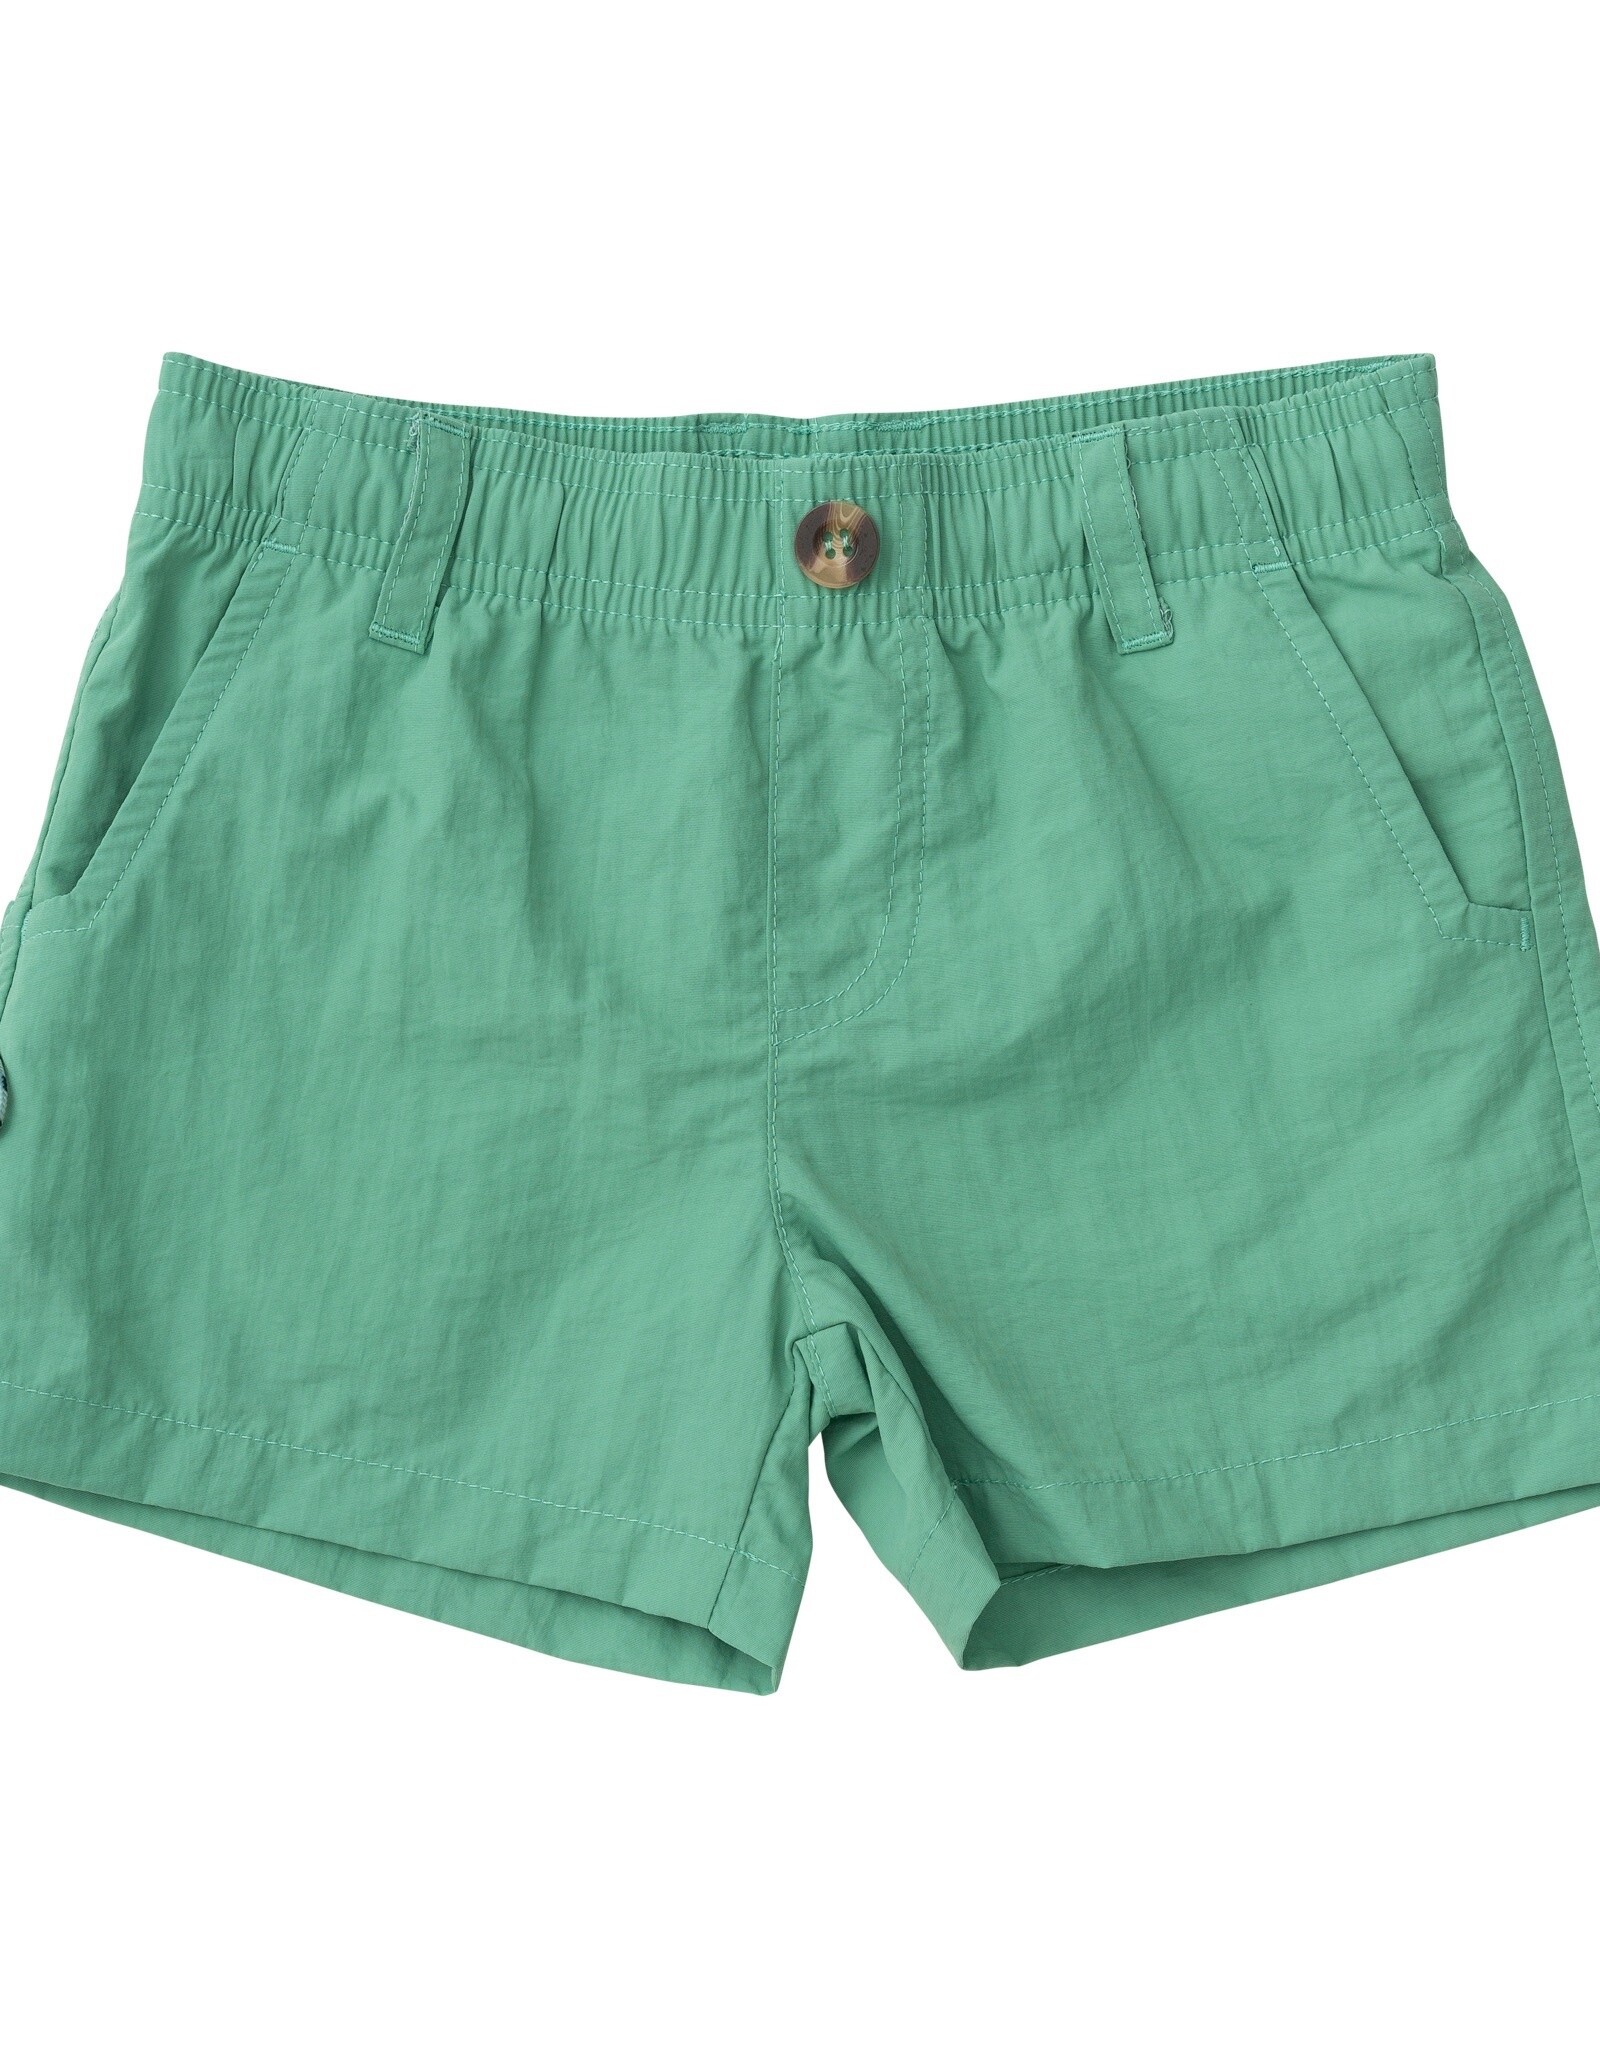 Prodoh Outrigger Performance Shorts, Green Spruce